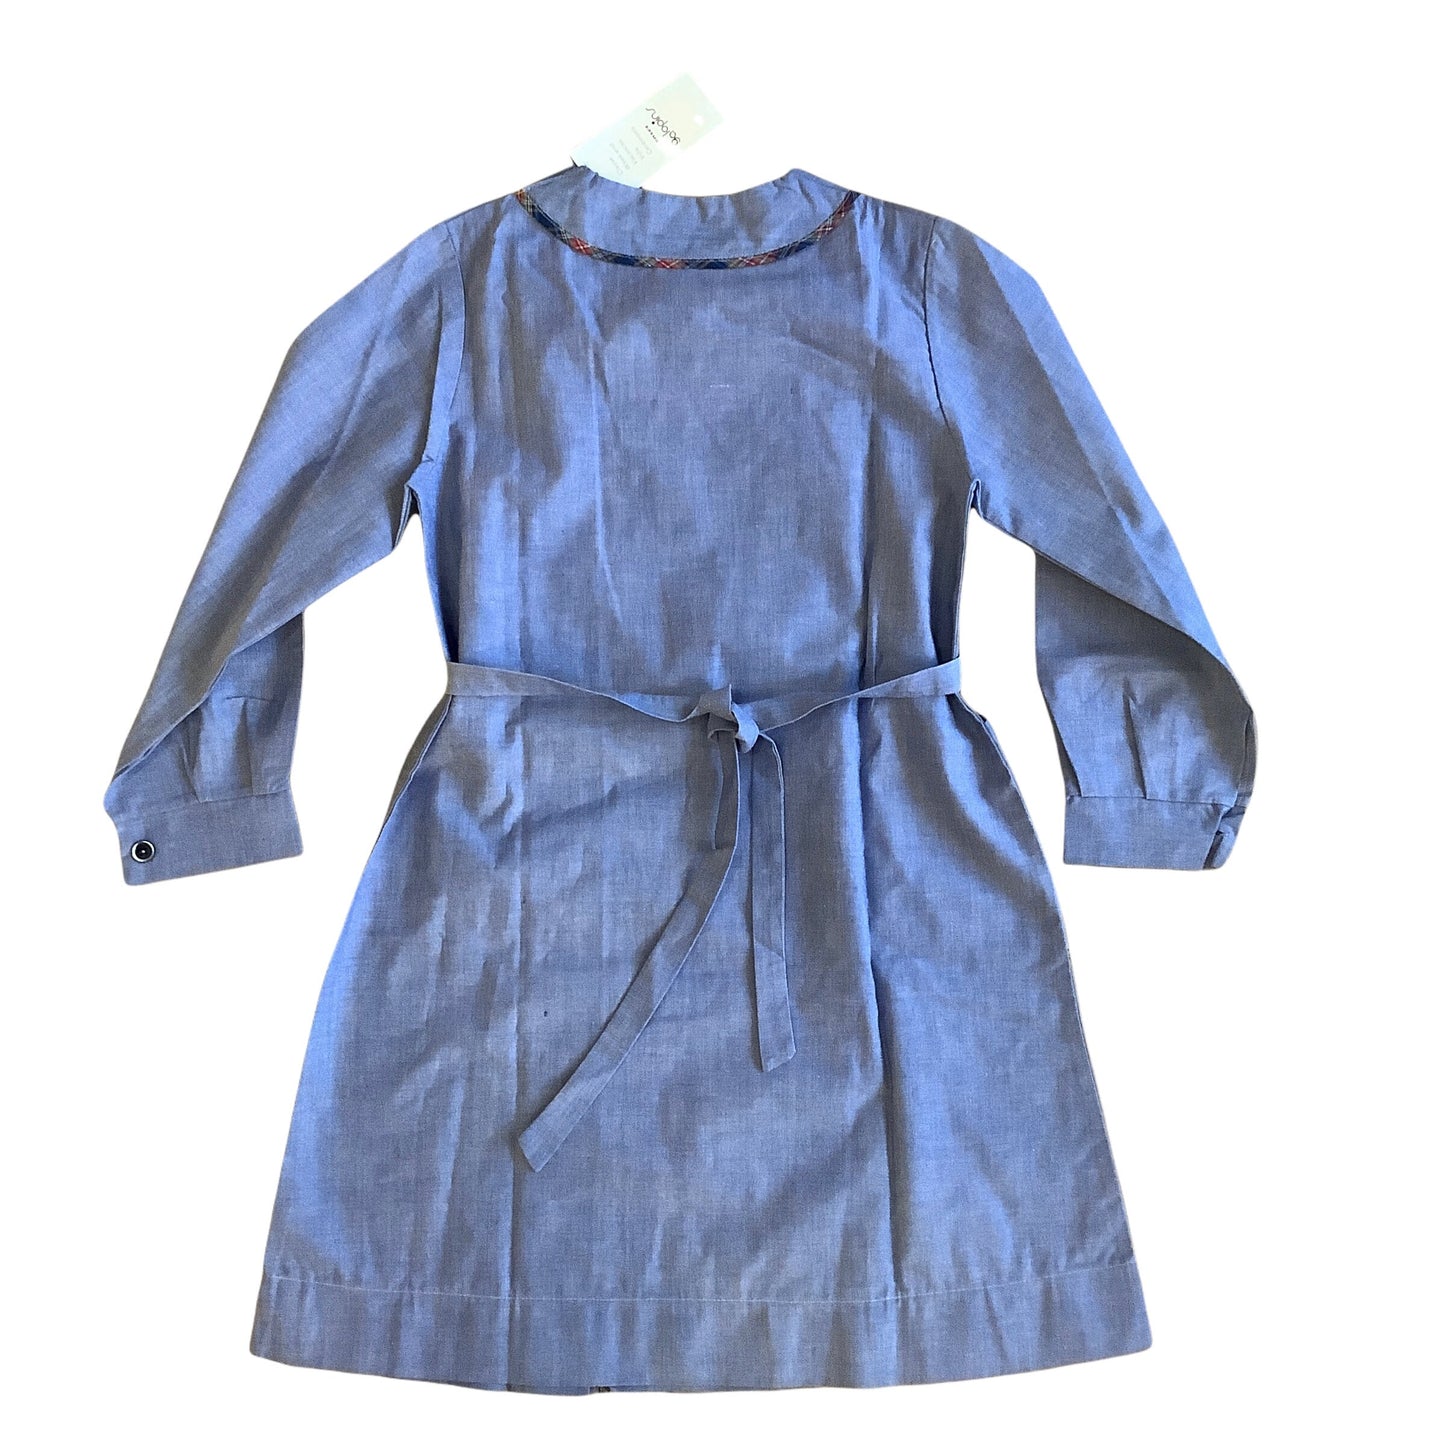 Vintage 70's Blue Dress / Blouse French Made 8-10 Y